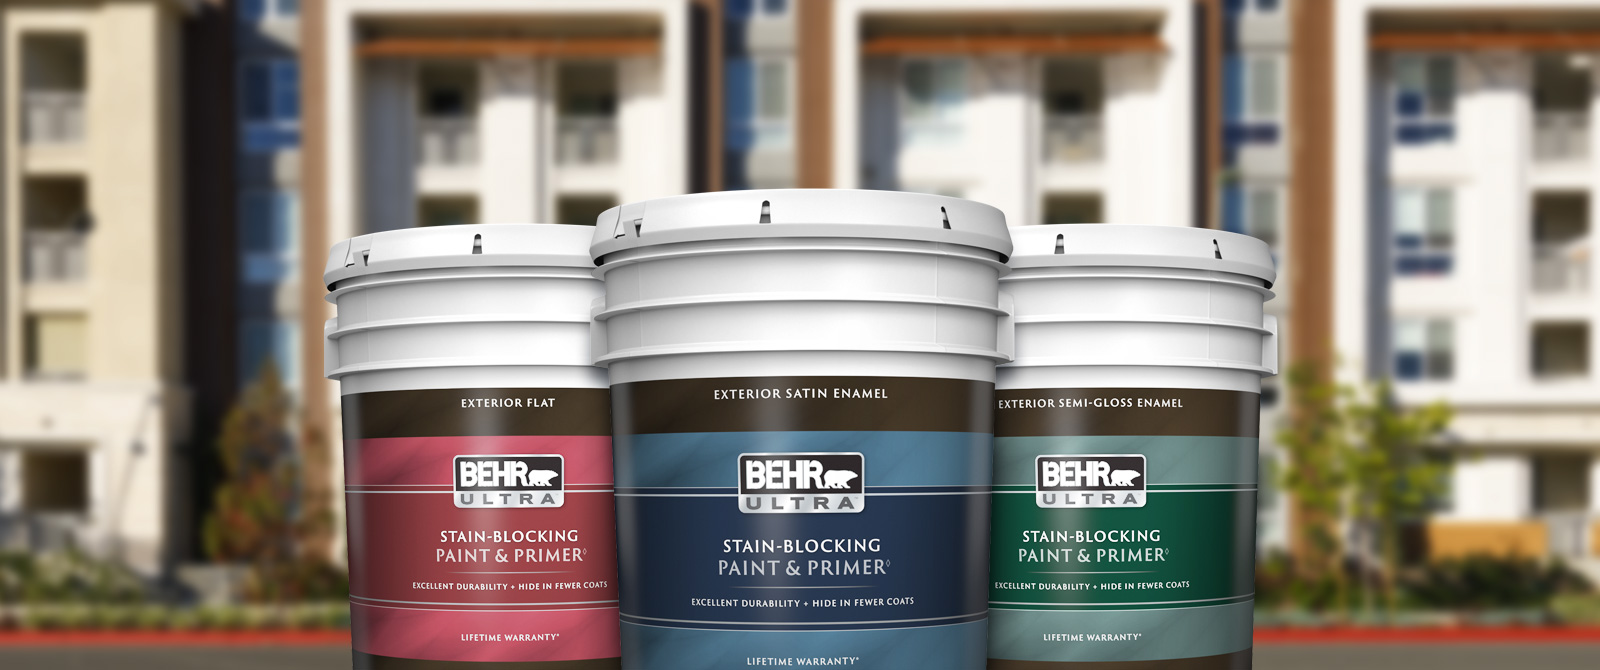 Behr Pro exterior Ultra products landing page desktop image featuring 5 gallon Ultra cans.